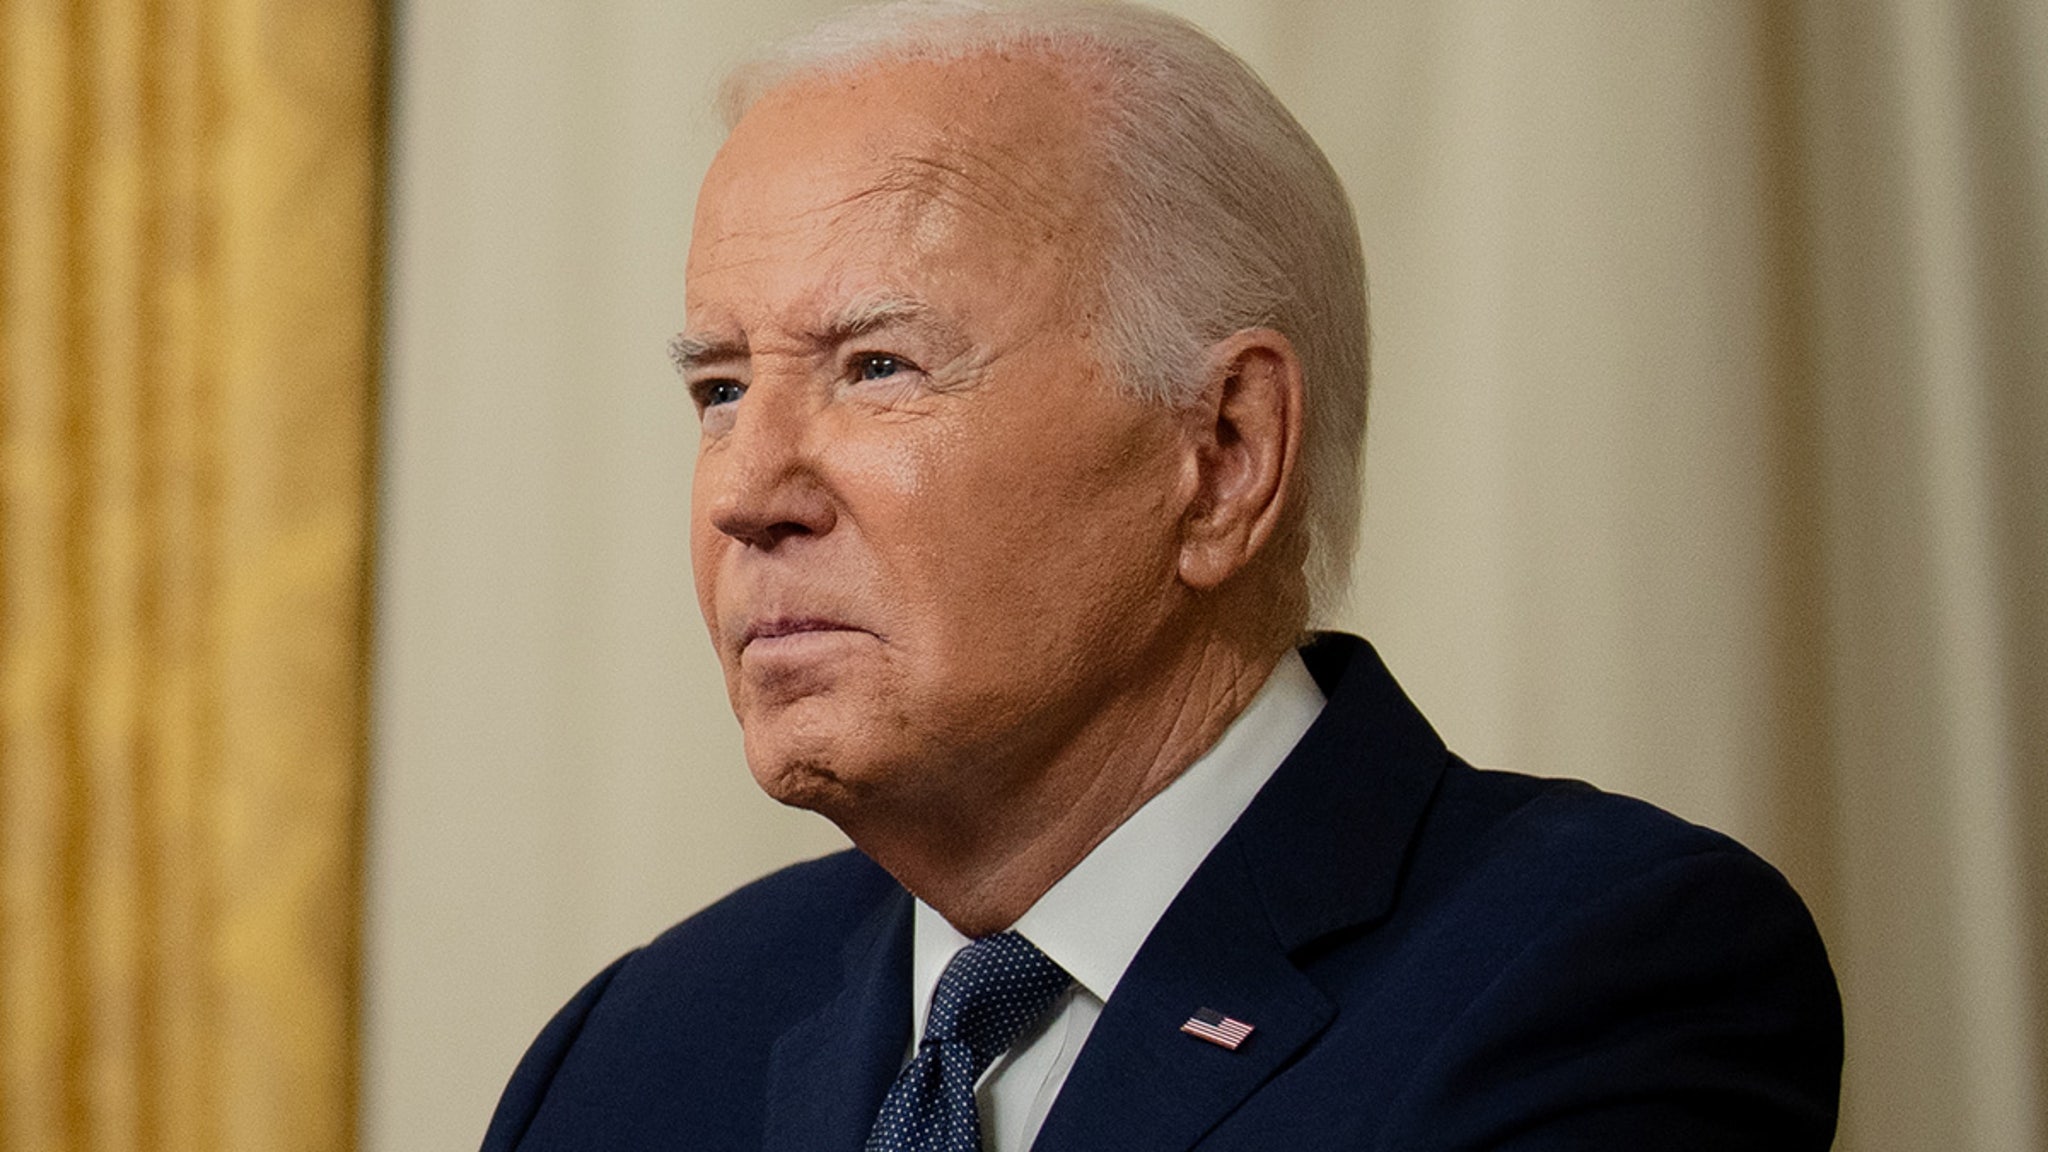 President Biden tests positive for COVID, public appearance canceled